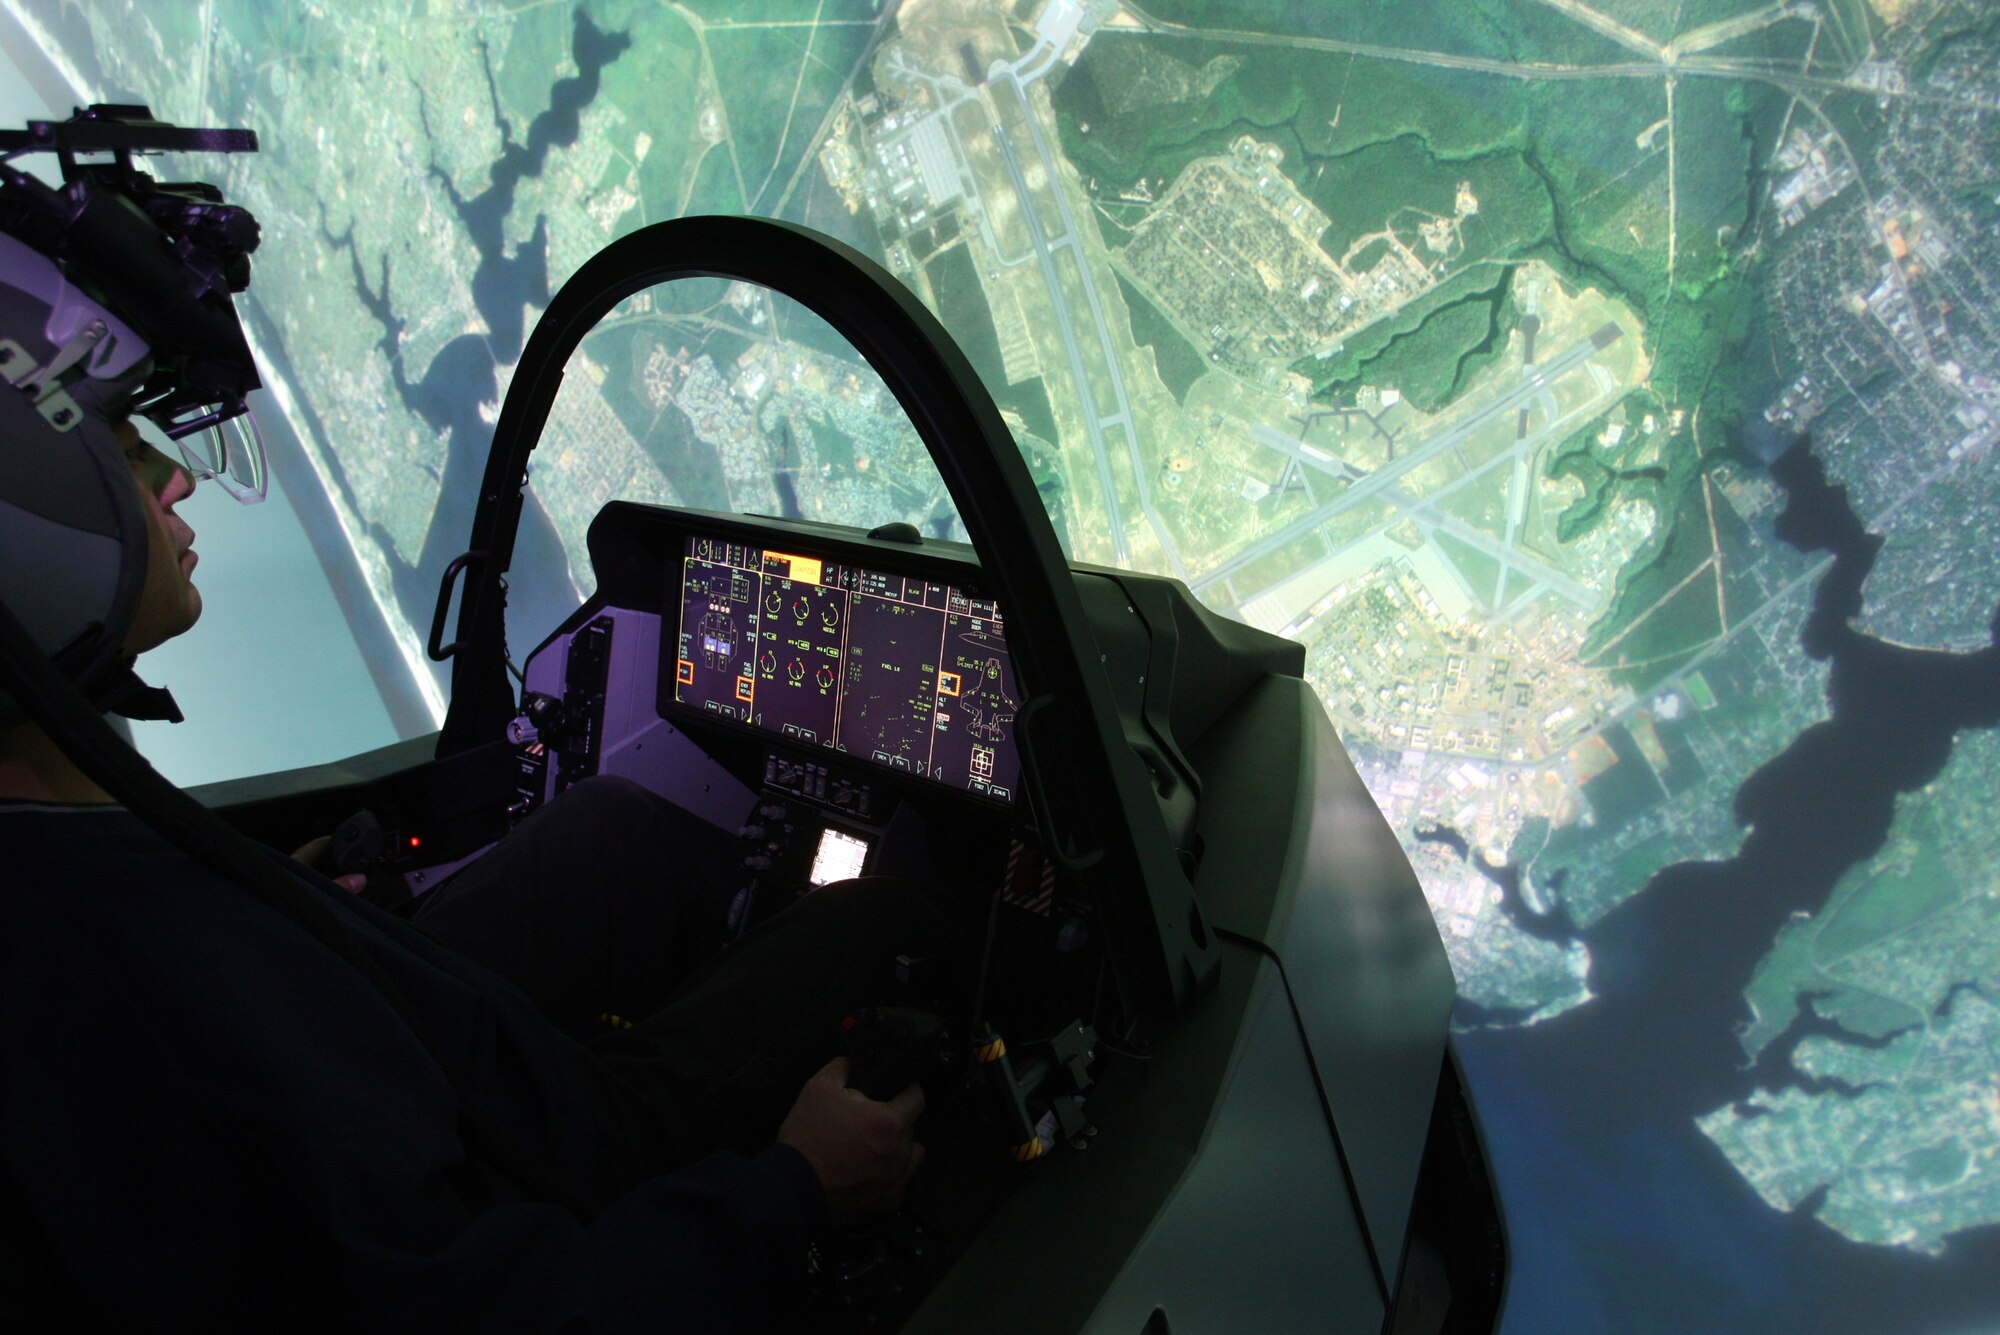 An Airman practices on an F-35 Lightning II full mission simulator at the 33rd Fighter Wing’s F-35 Academic Training Center on Eglin Air Force Base, Fla., Nov. 22, 2013. The pilot and maintainer qualifications are accomplished through simulations to ensure efficient mission readiness. As the first of its kind in the Department of Defense, the wing is responsible for F-35 Lightning II pilot and maintainer training for the DOD and, in the future, at least eight coalition partners. (U.S. Air Force courtesy photo)